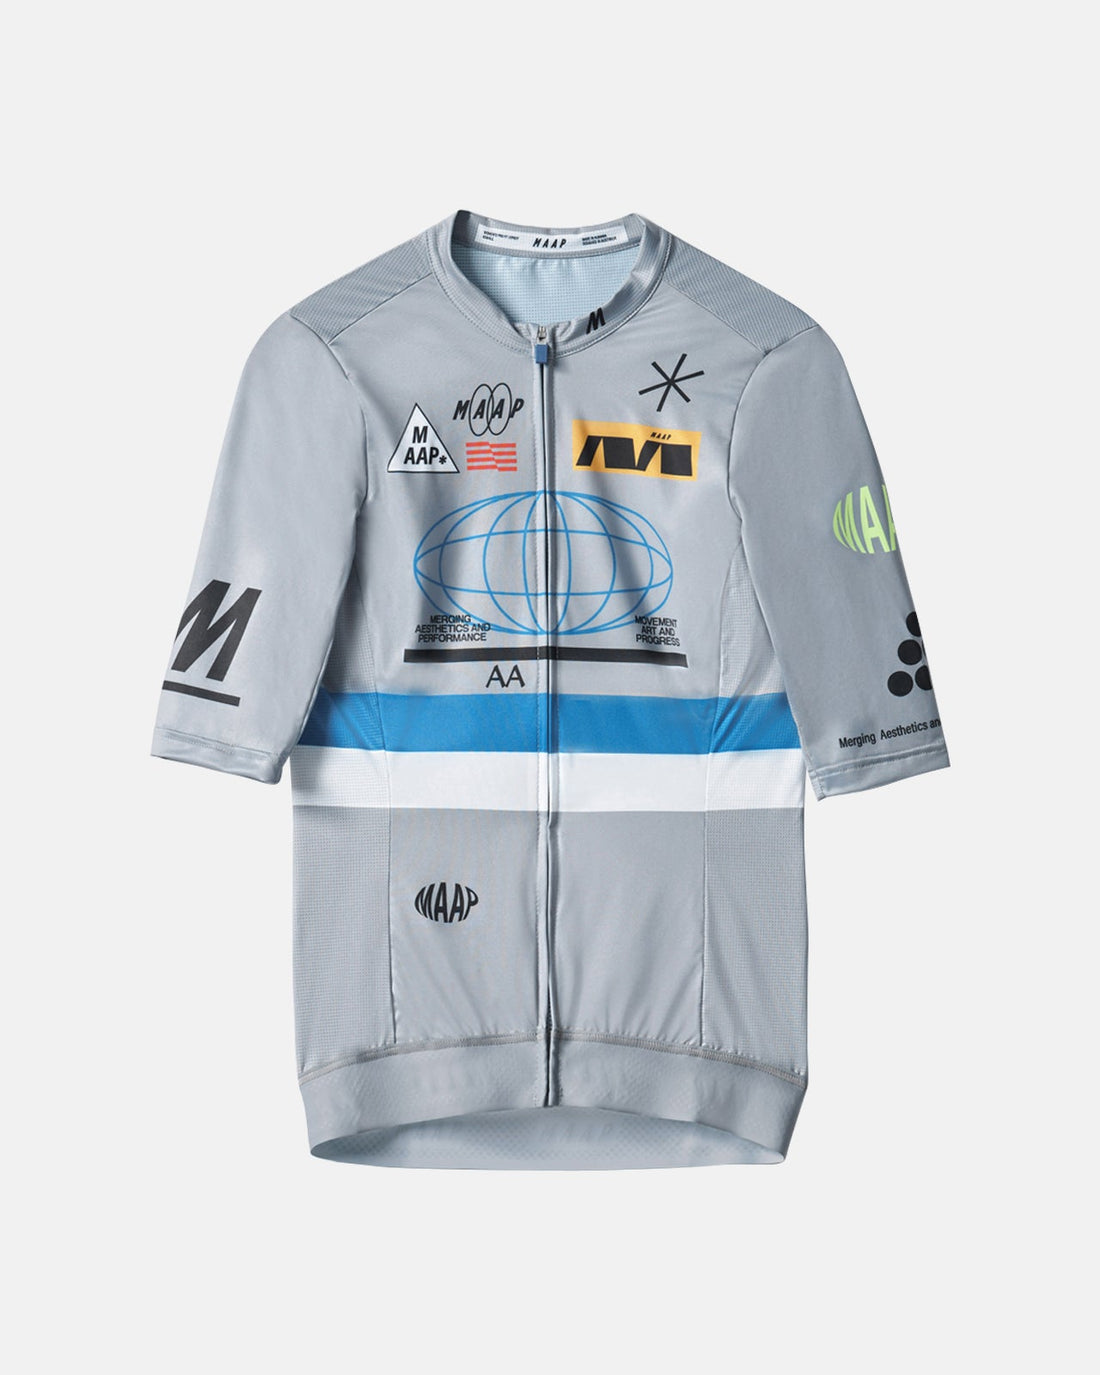 Axis Pro Jersey - Storm - MAAP